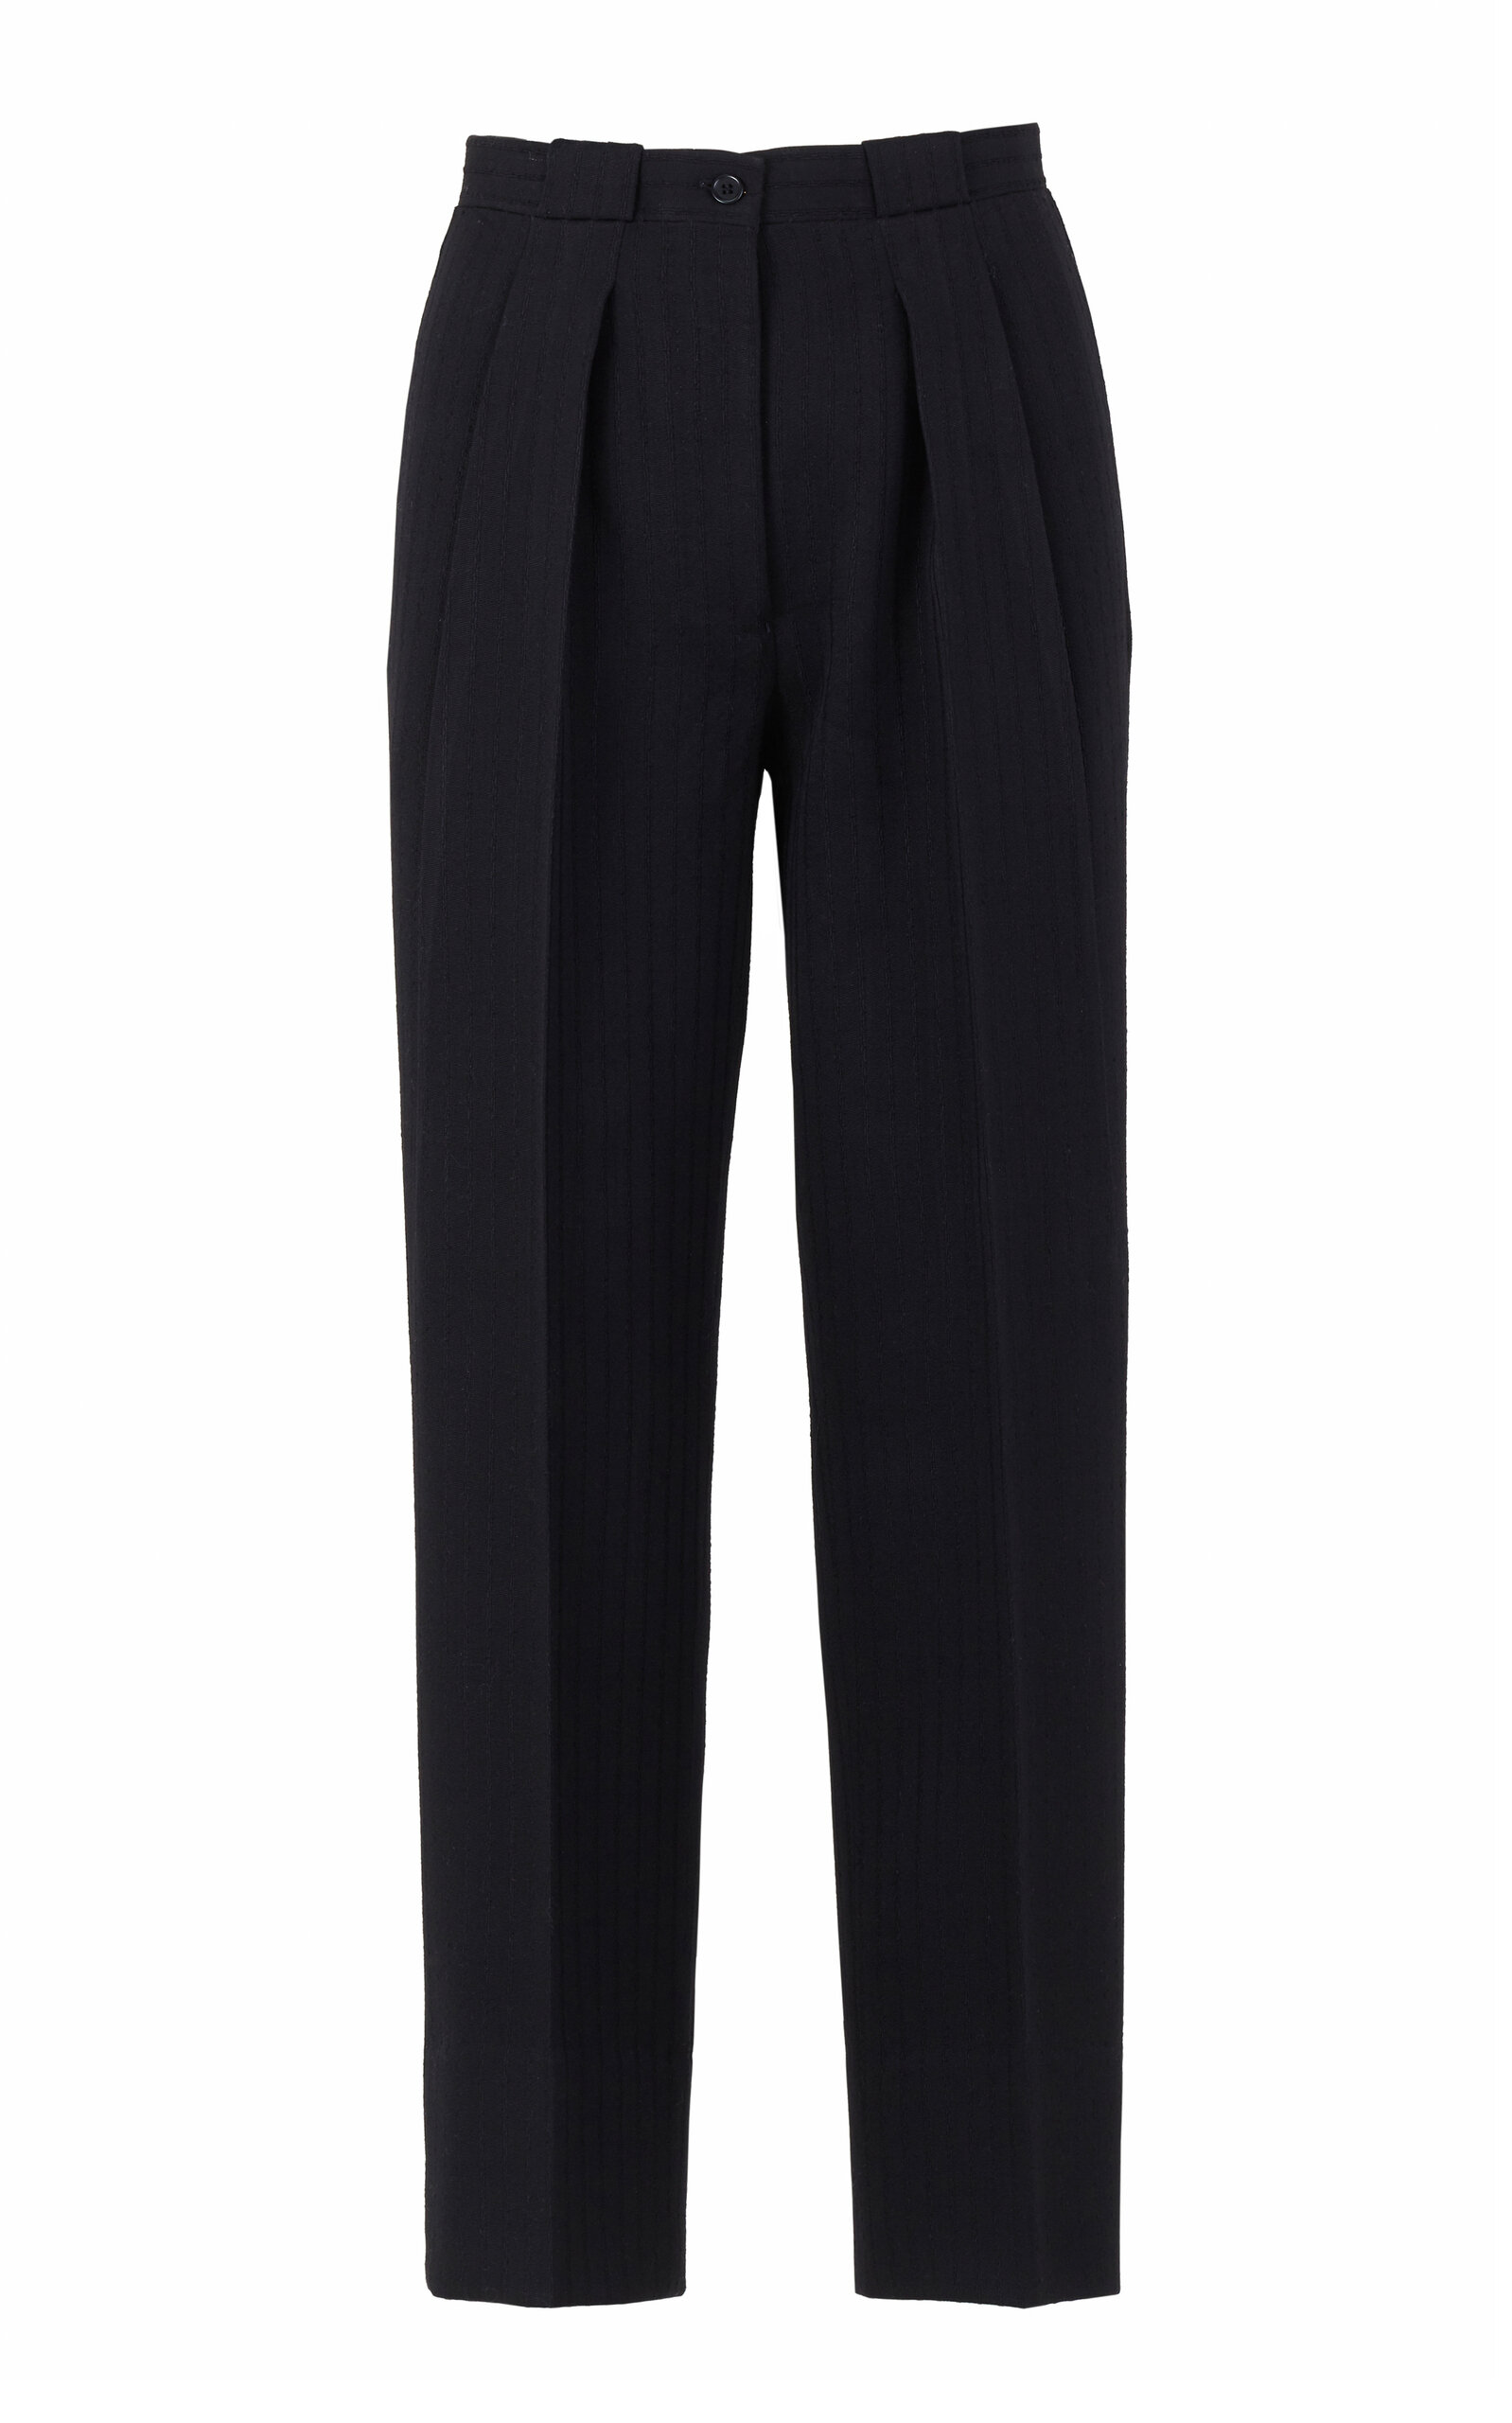 The Spencer Wool-Jacquard Trousers